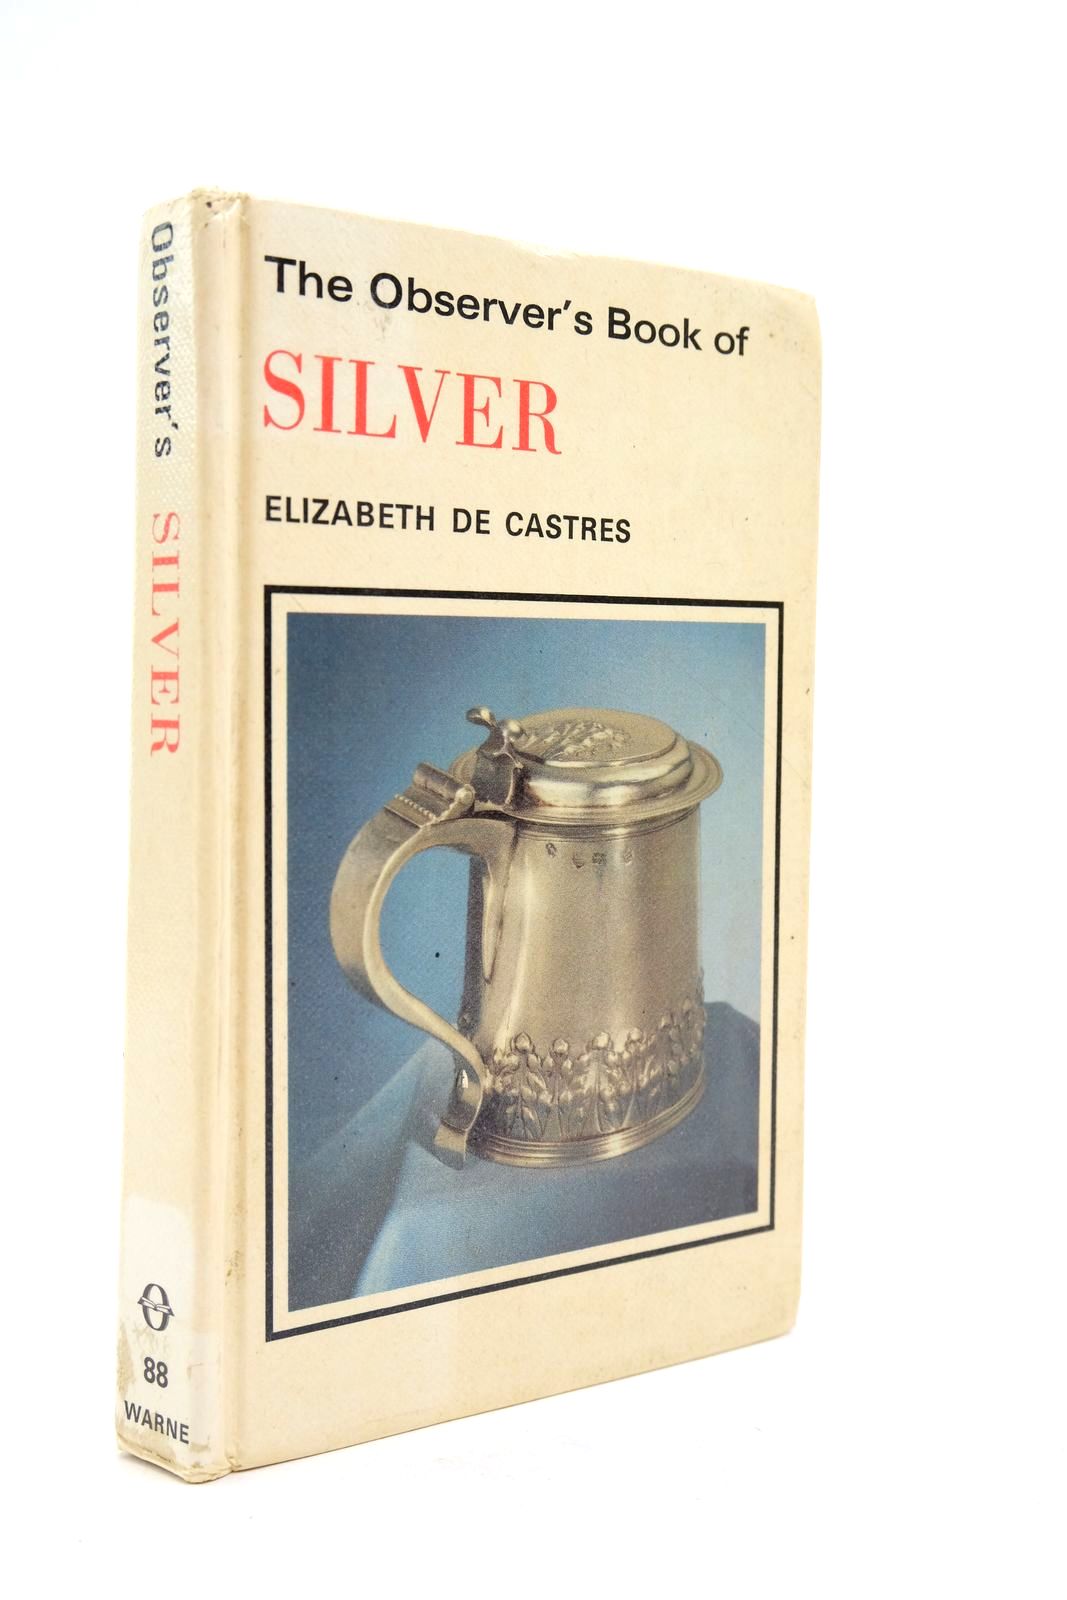 Photo of THE OBSERVER'S BOOK OF SILVER written by De Castres, Elizabeth published by Frederick Warne (STOCK CODE: 2139676)  for sale by Stella & Rose's Books